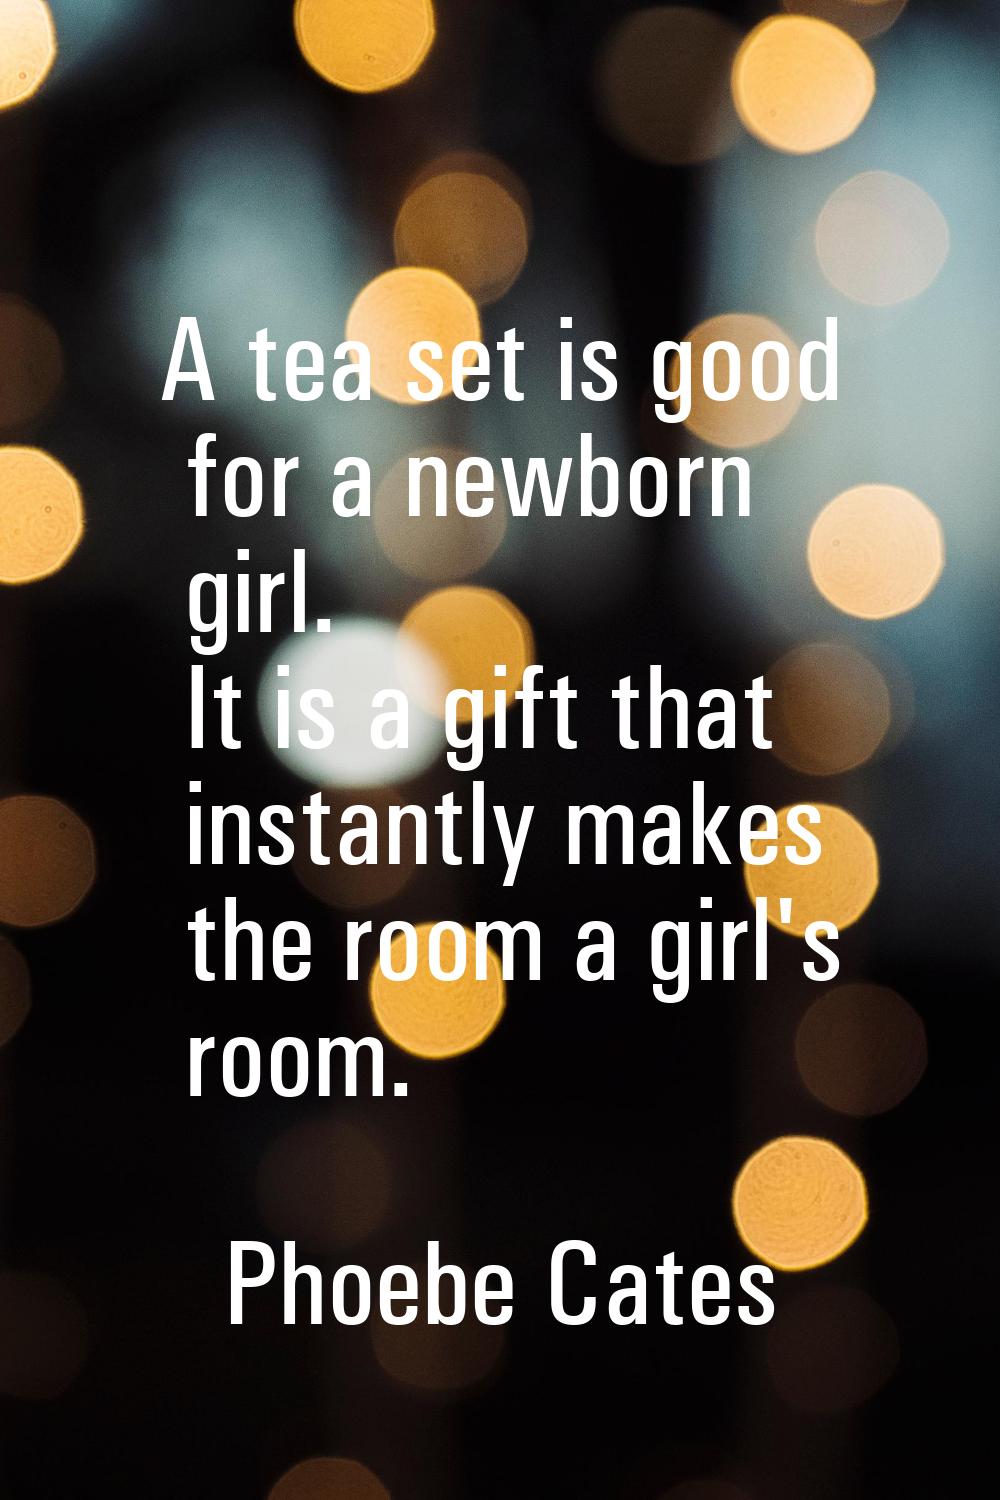 A tea set is good for a newborn girl. It is a gift that instantly makes the room a girl's room.